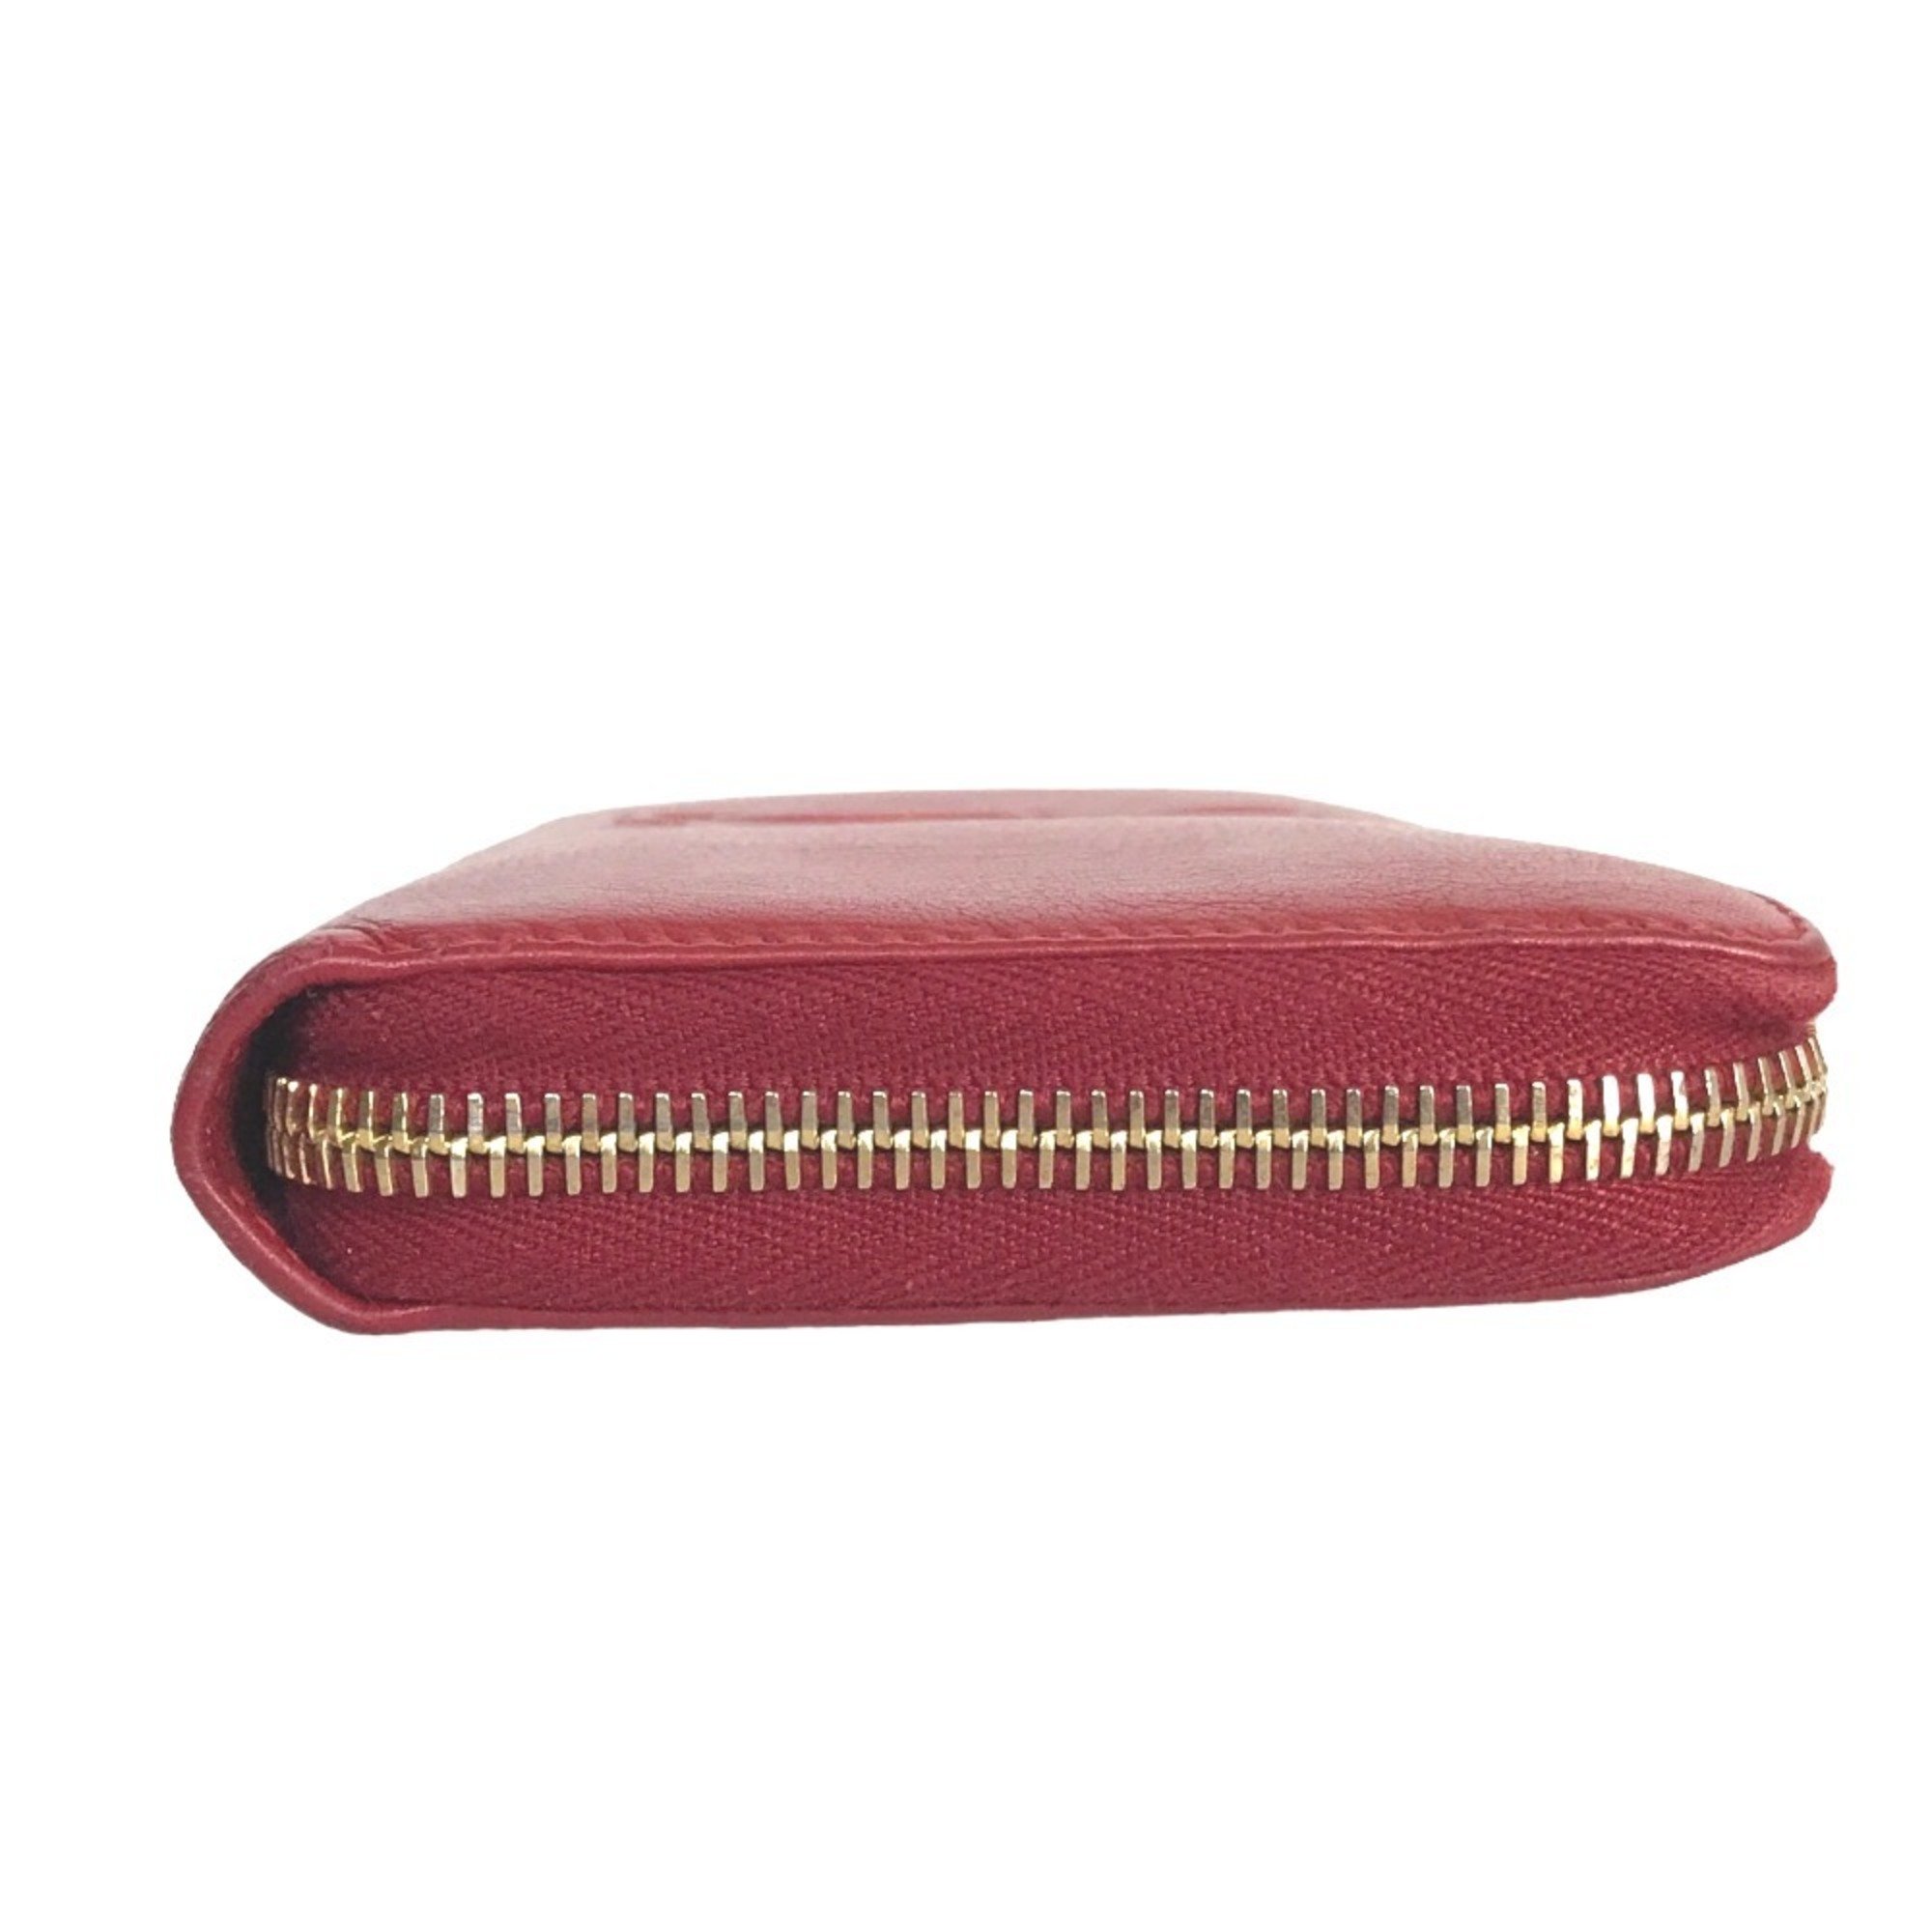 YVES SAINT LAURENT Round Zip Long Wallet for Women, Leather, Red